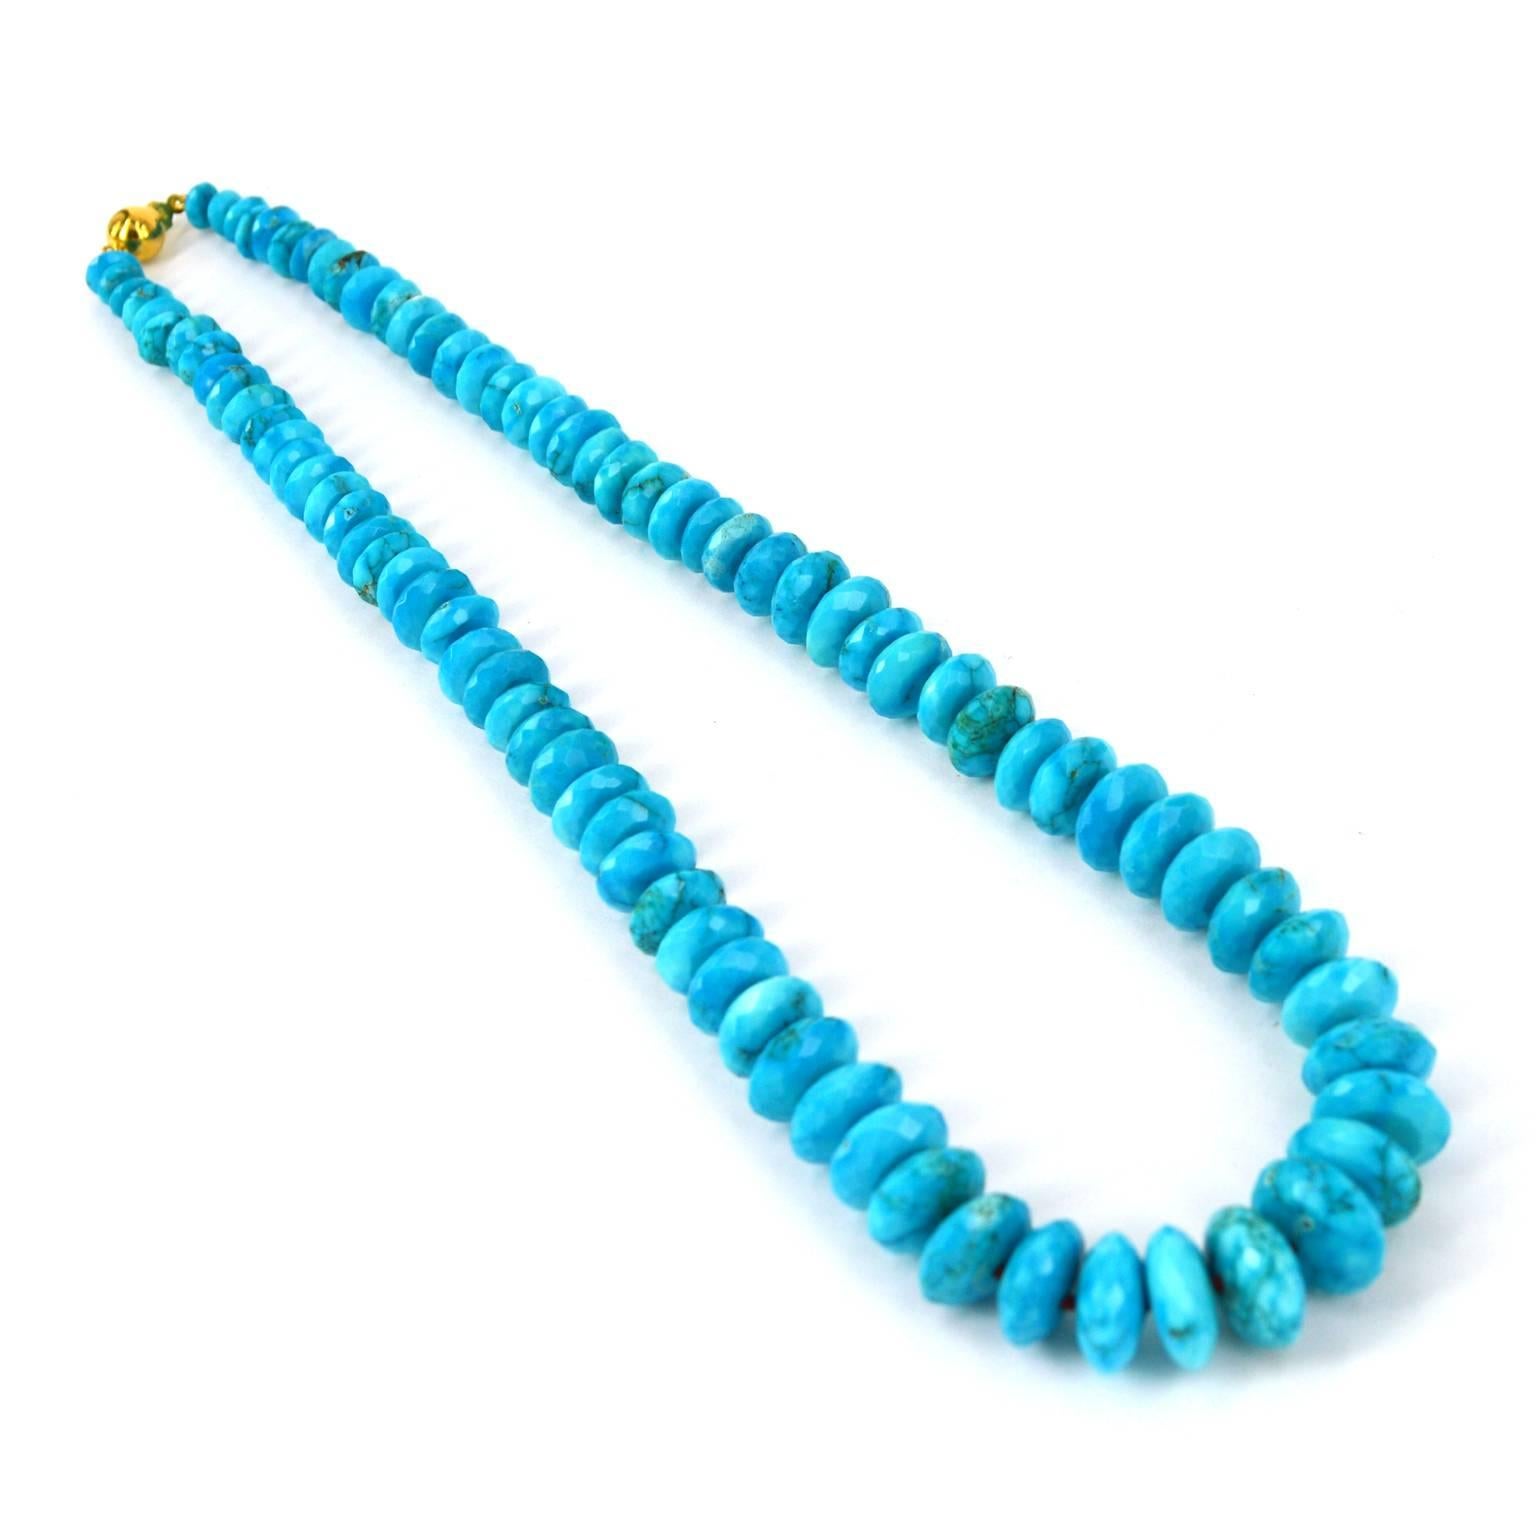 Graduated Turquoise roundel necklace. Faceted blue roundels with matrix ranging from 7- 14mm. Hand knotted on chocolate thread with an 8mm vermeil ball clasp.
50cm in length.

All stones are natural and as such may include natural inclusions and